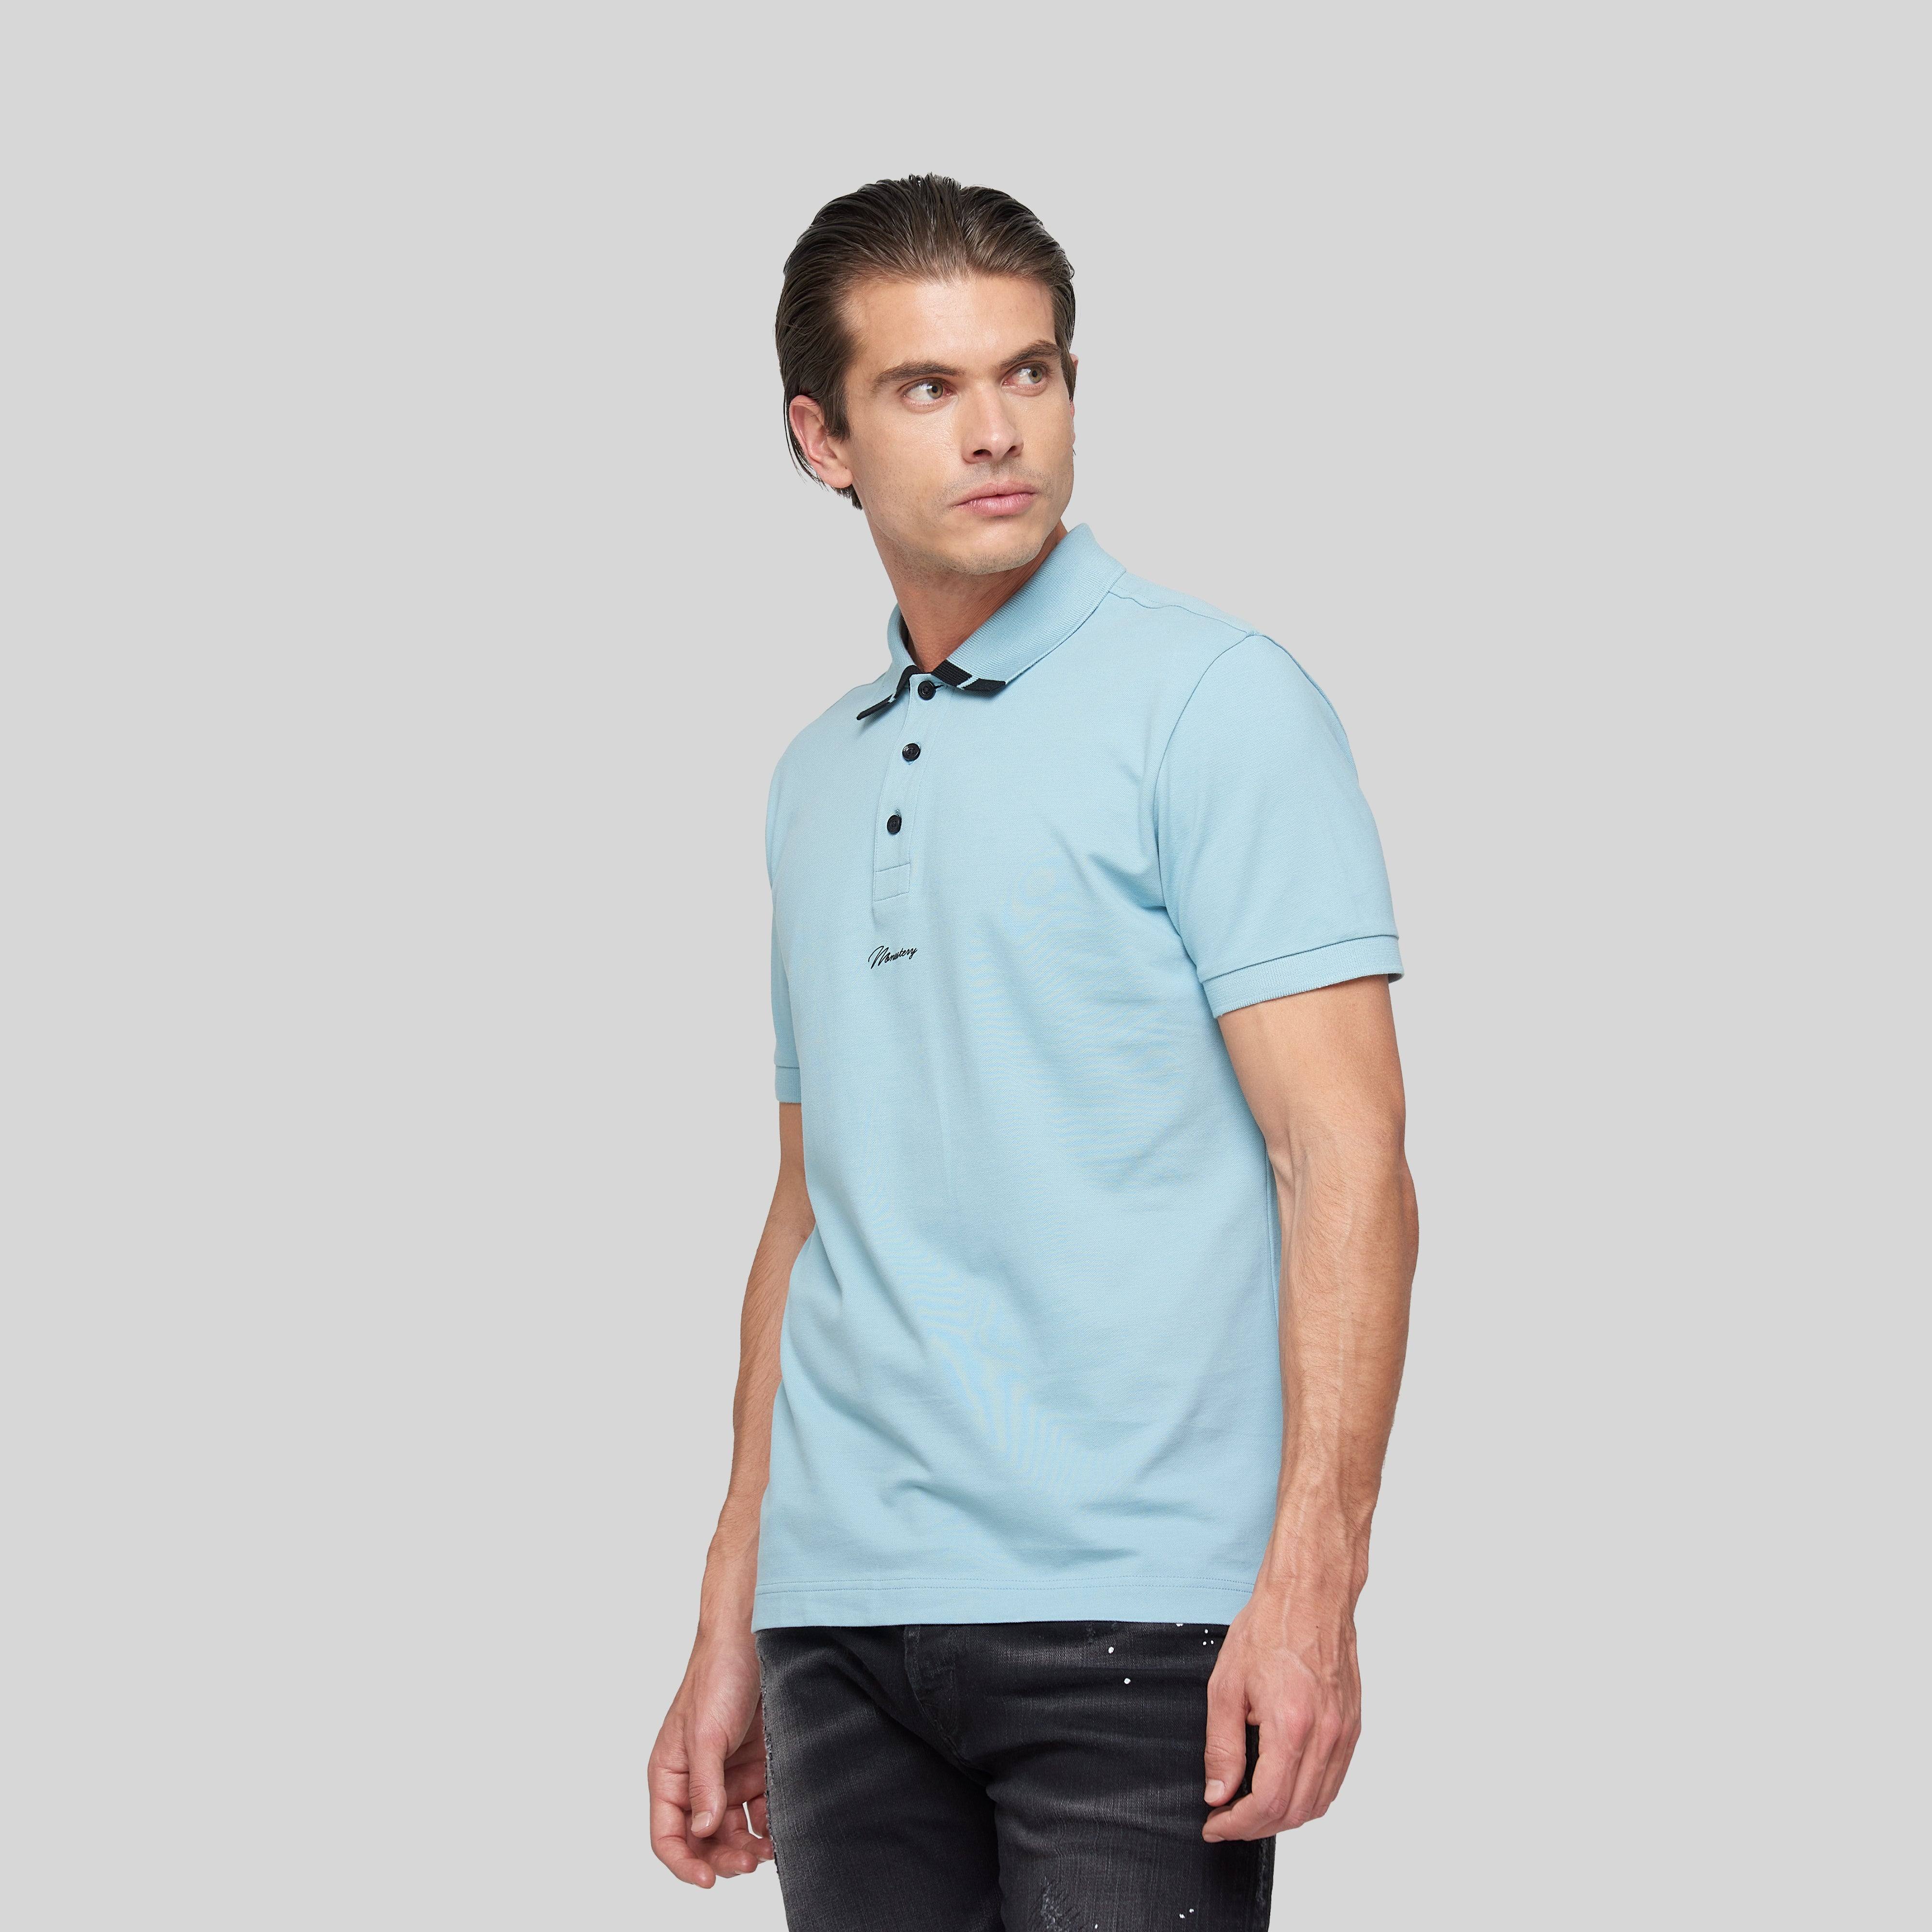 MEGES BLUE POLO | Monastery Couture